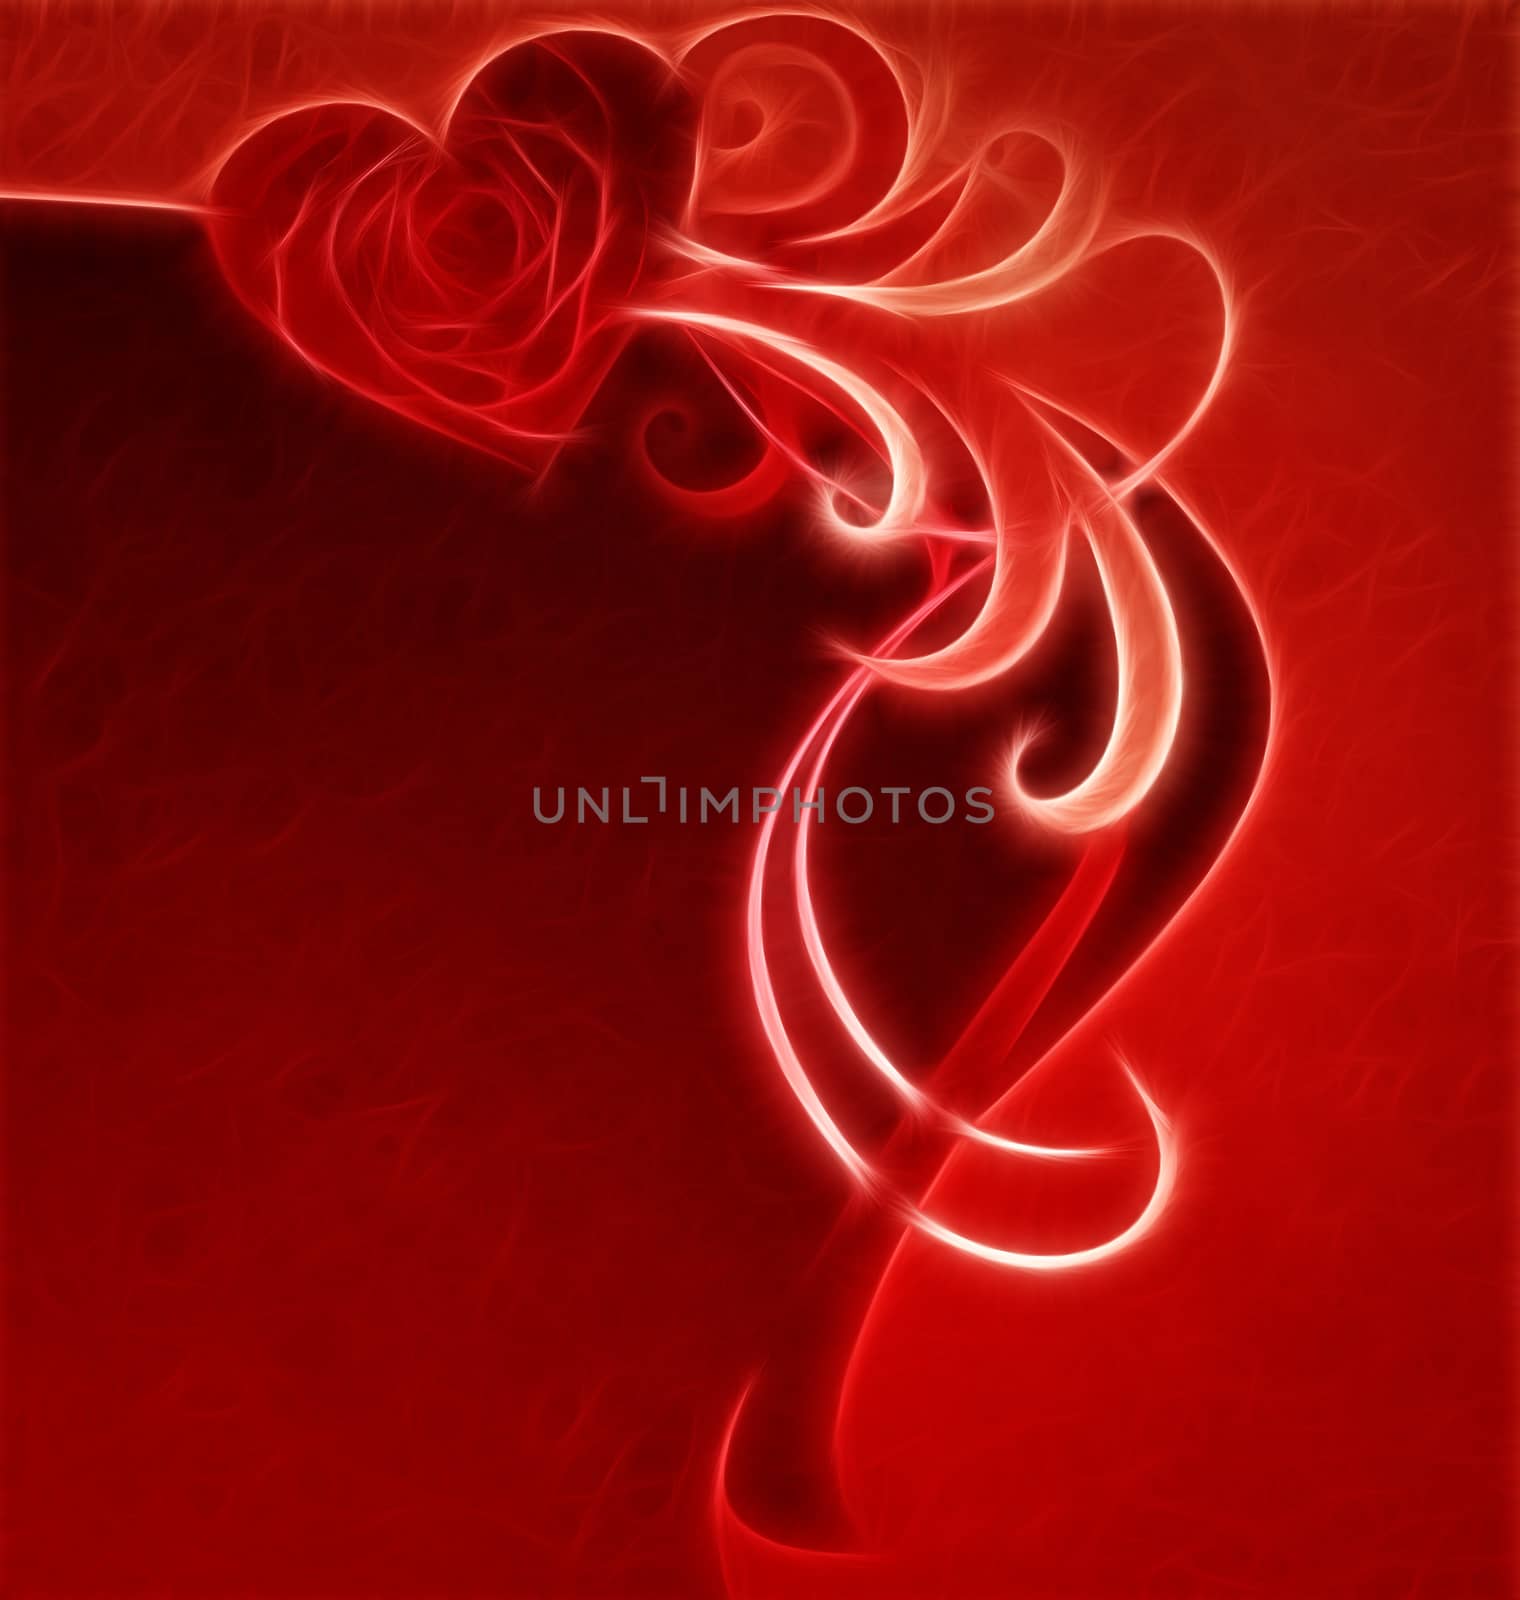 red heart with red rose grunge abstract background for love and wedding neeeds